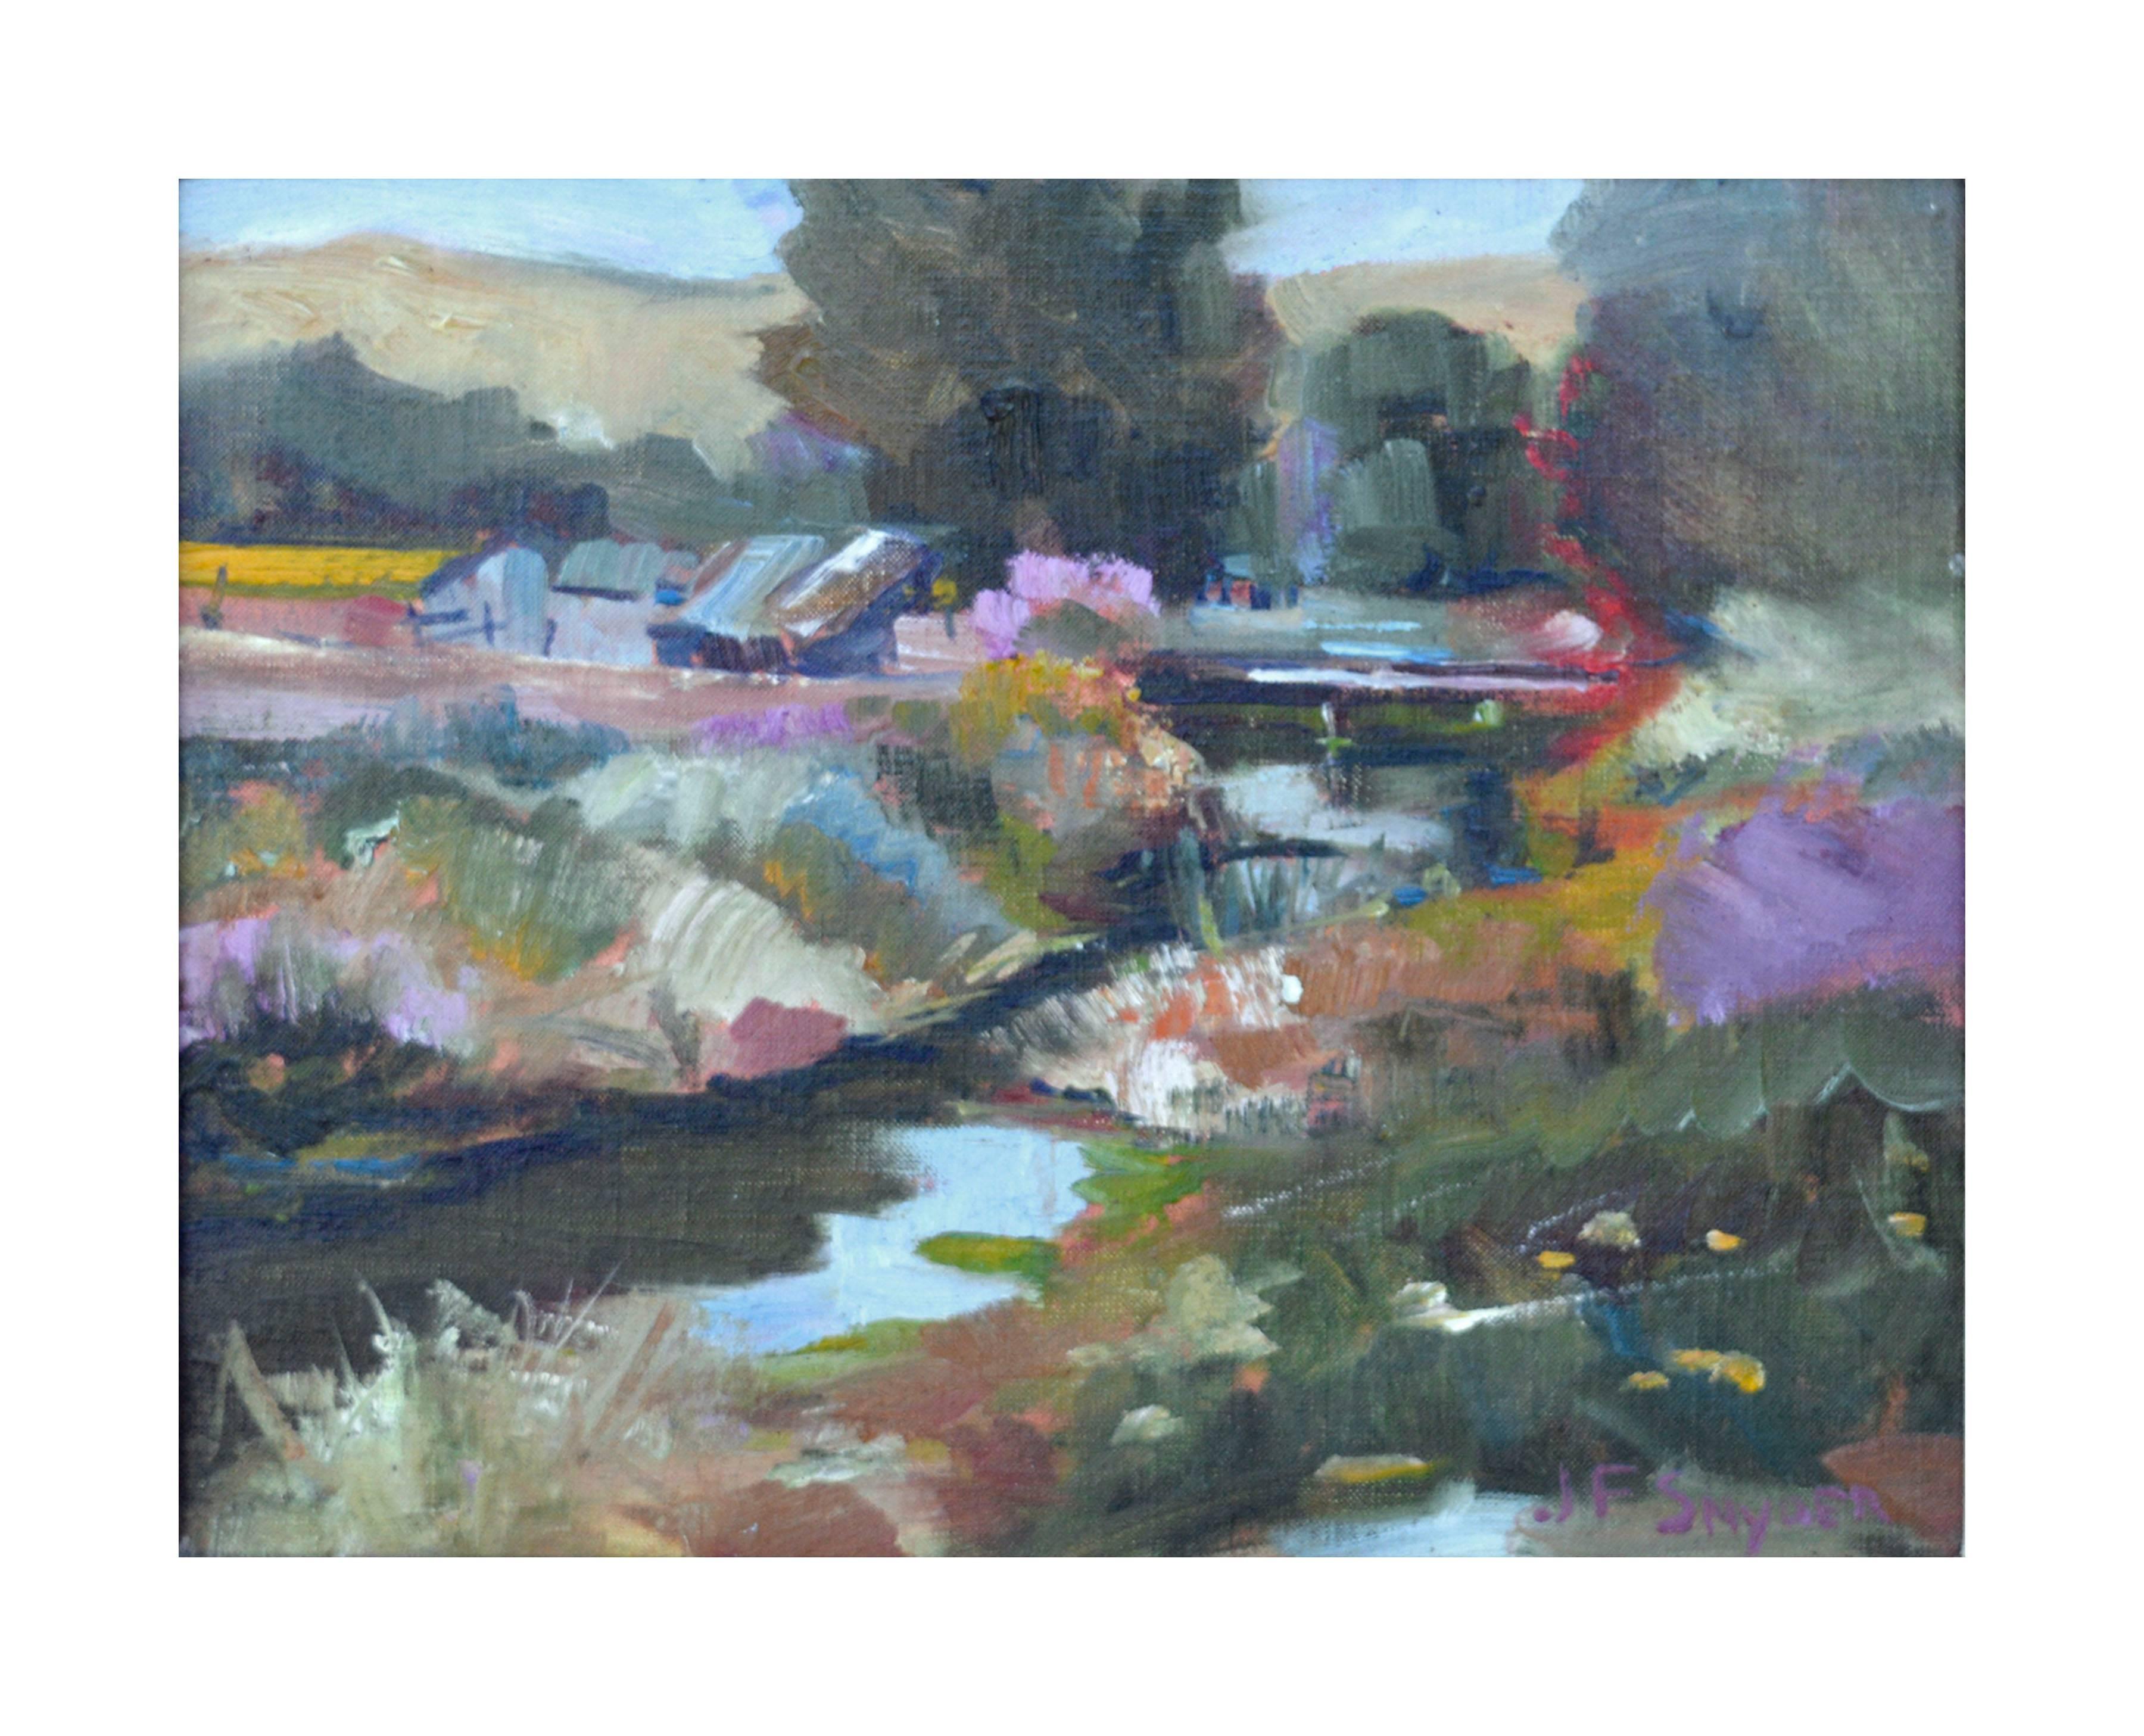 San Benito Creek California Landscape - Painting by J.F. Snyder